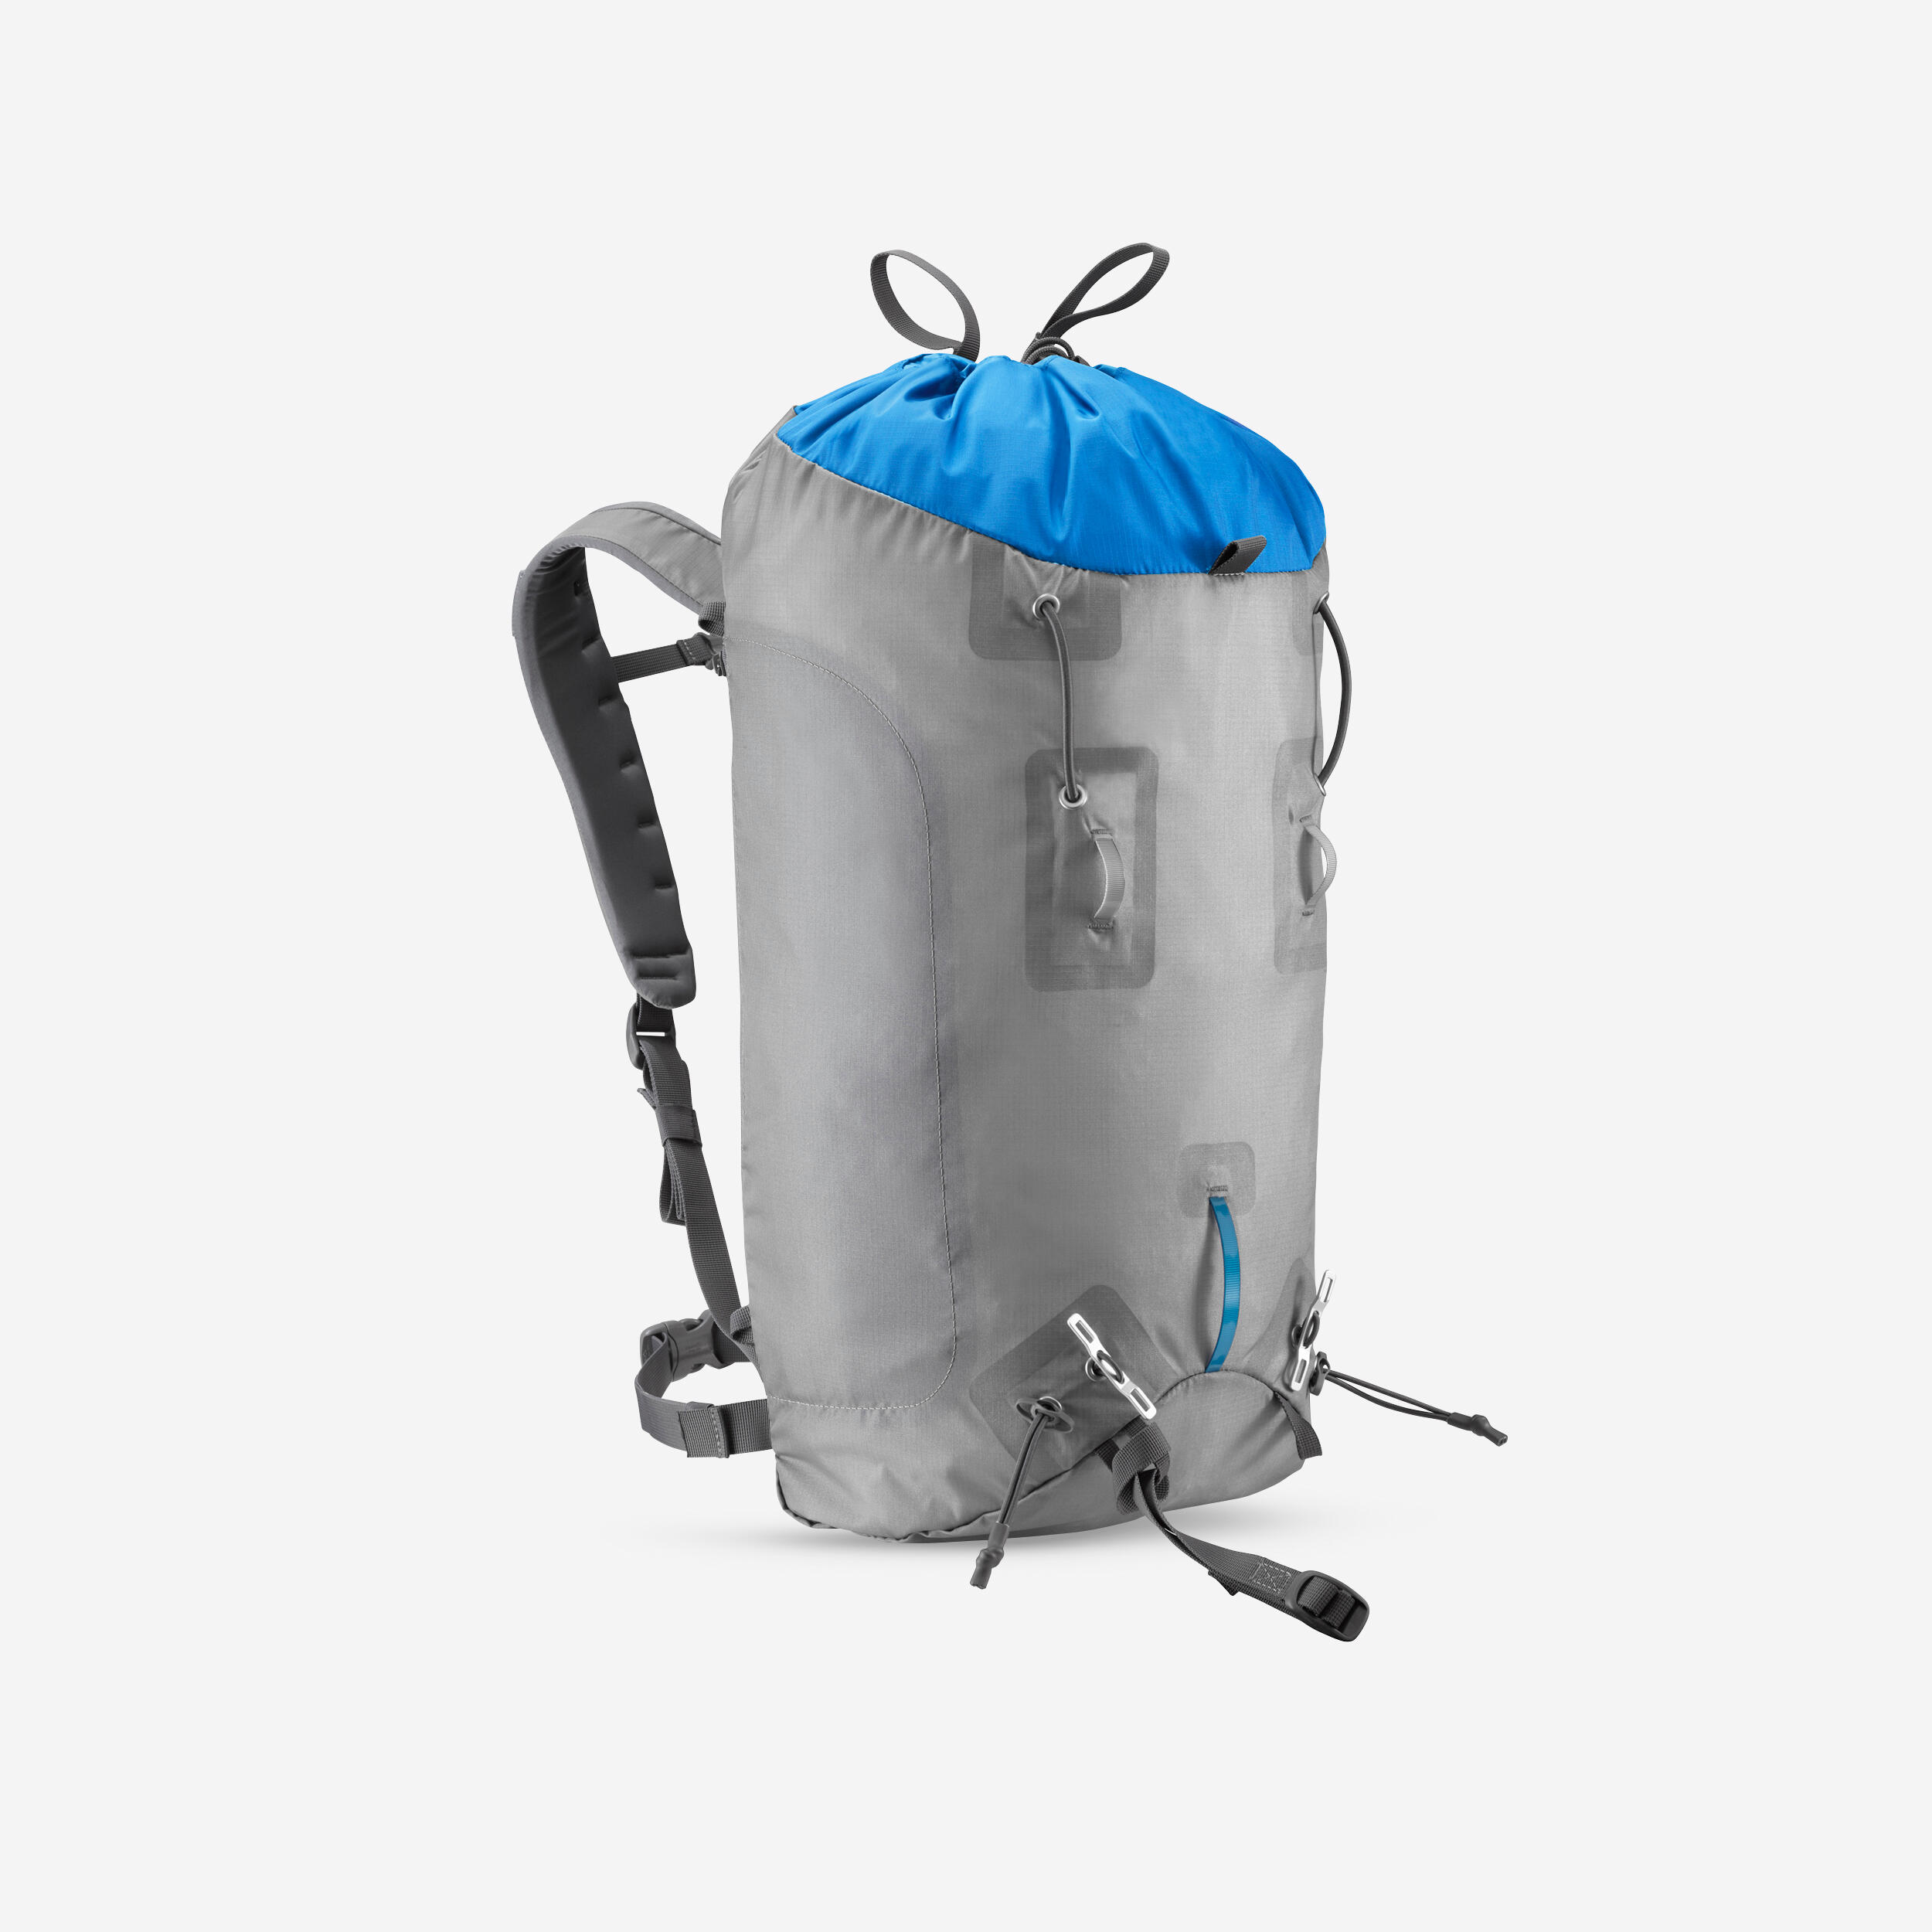 SIMOND Mountaineering Backpack 33 Litres - SPRINT 33 BLUE